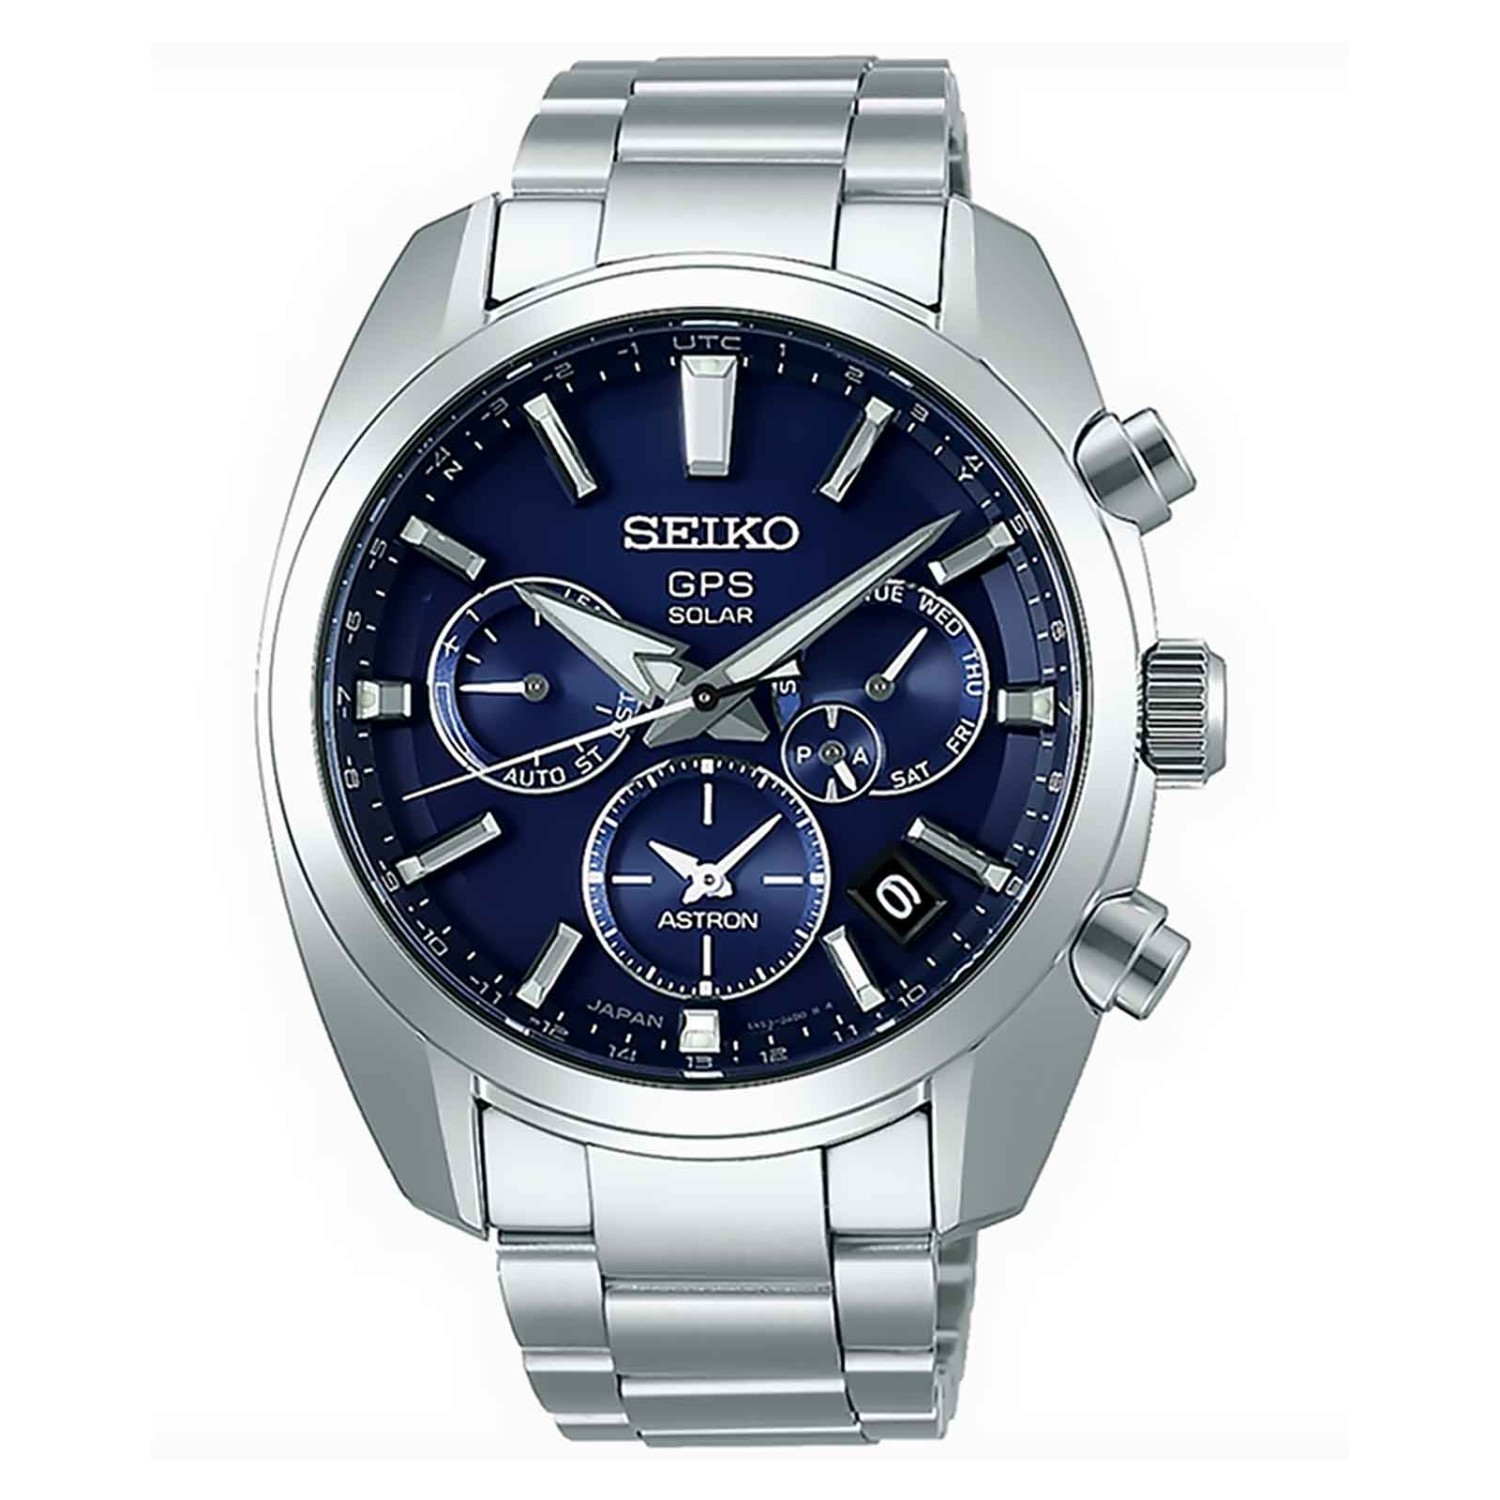 SSH019J SEIKO Gents Astron GPS Solar Dual Time Watch. 3 Months No Payments and Interest for Q Card holders This watch is pressure rated at 200 metres or 20bar. This means it is suitable for water sports and wearing in the surf and diving.  No Watch should